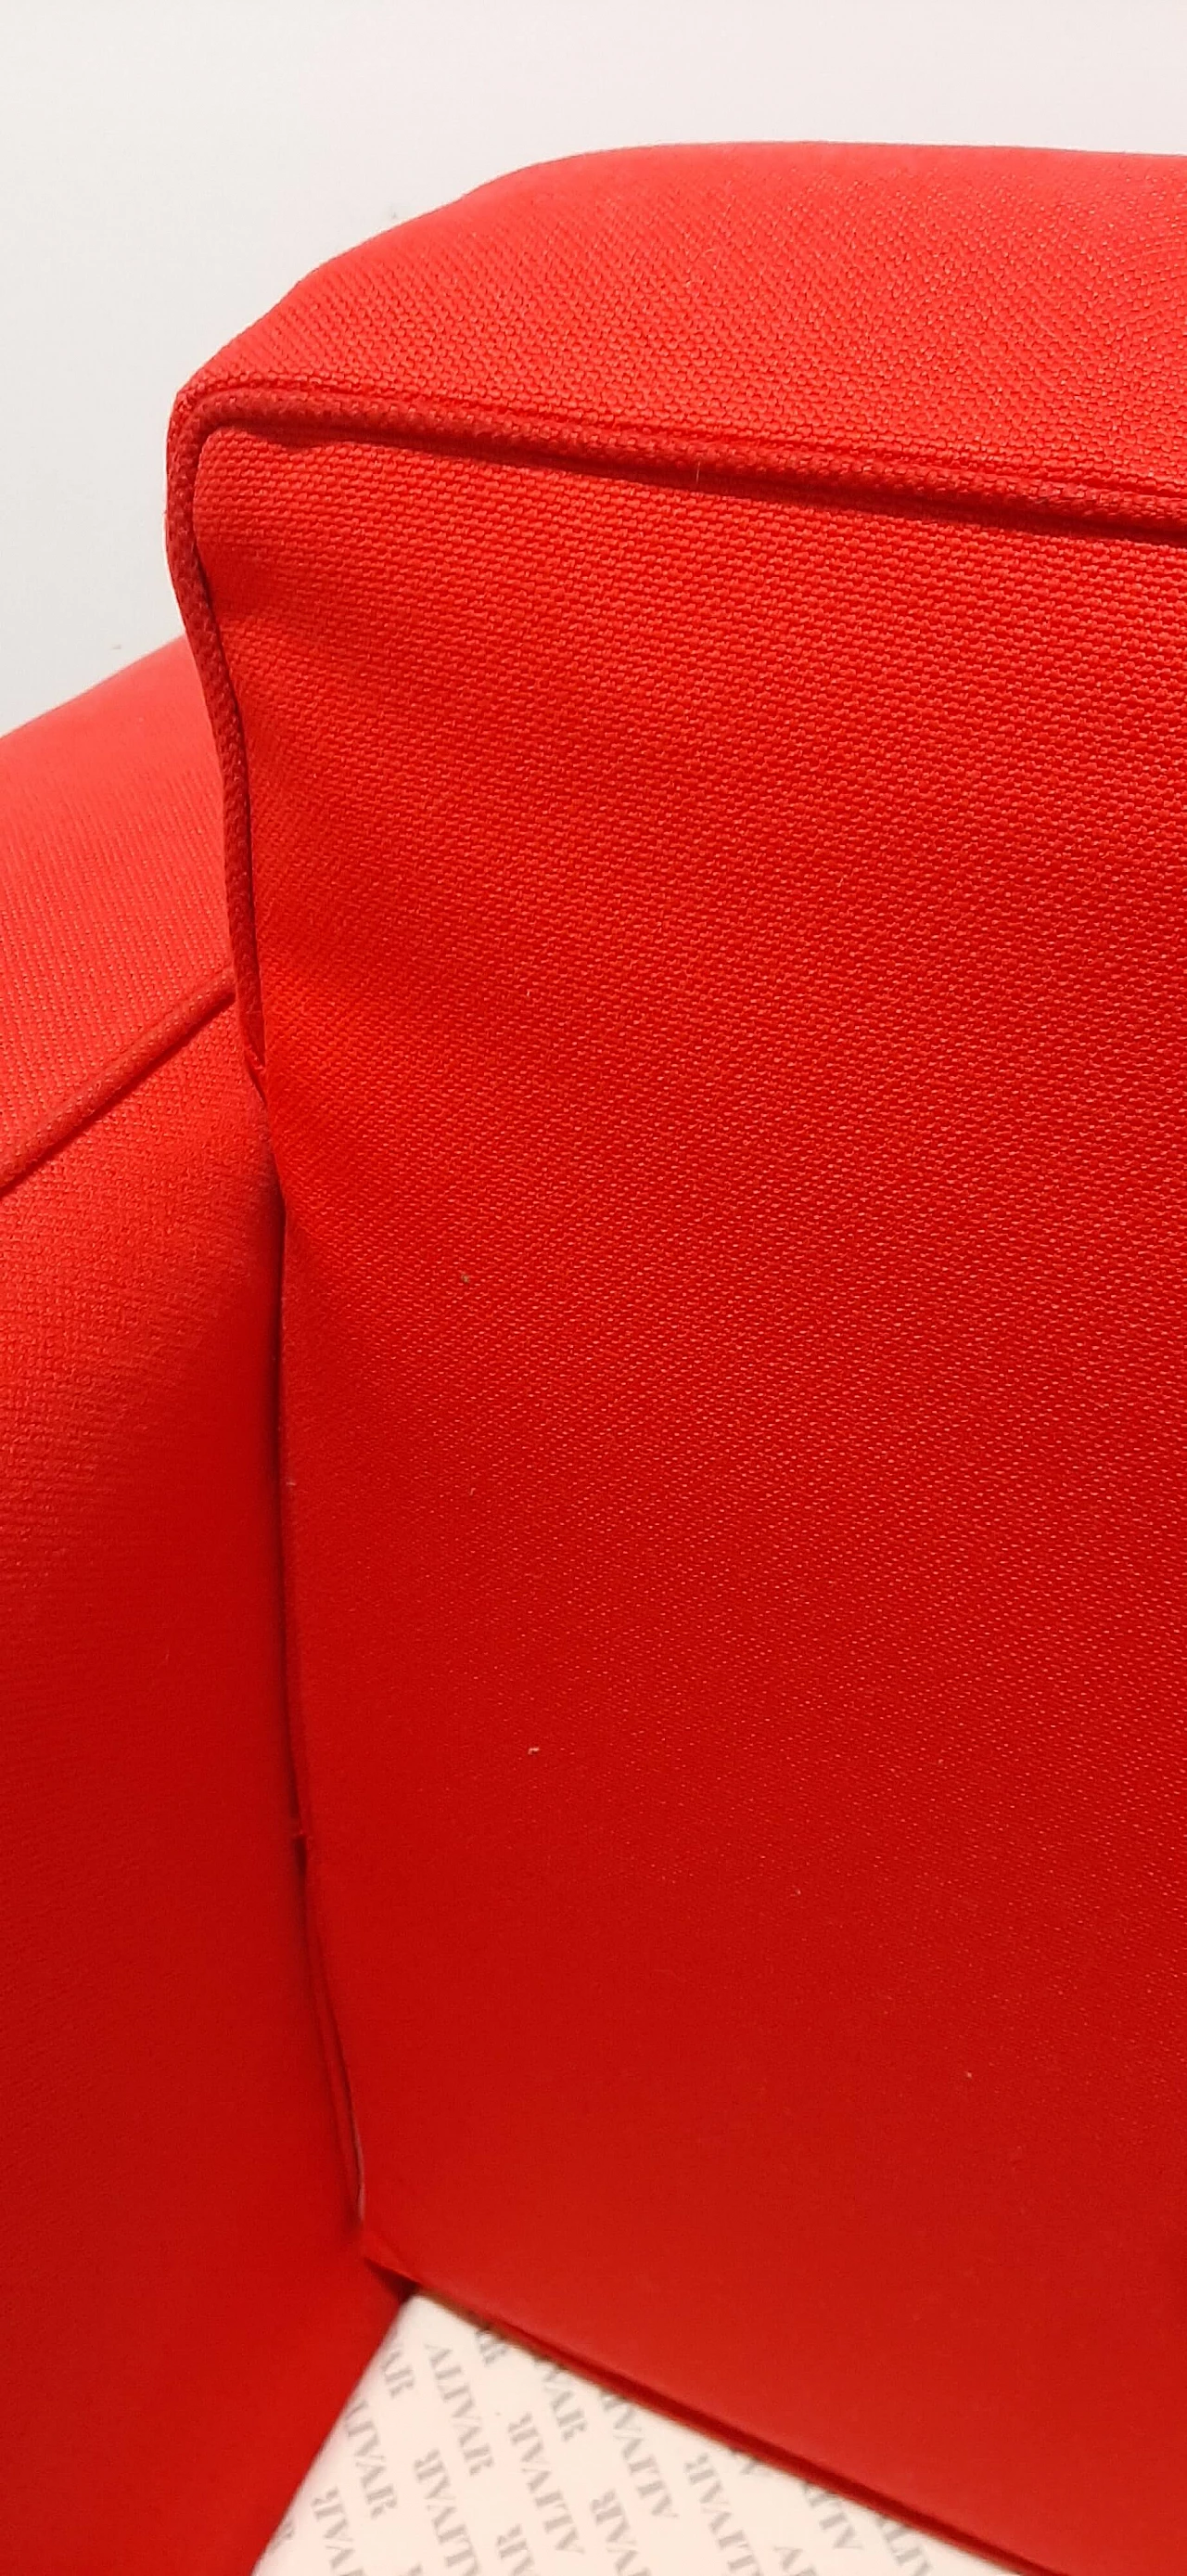 LC 2 armchair in red cotton by Le Corbusier, P. Jeanneret, C. Perriand for Alivar, 1980s 109